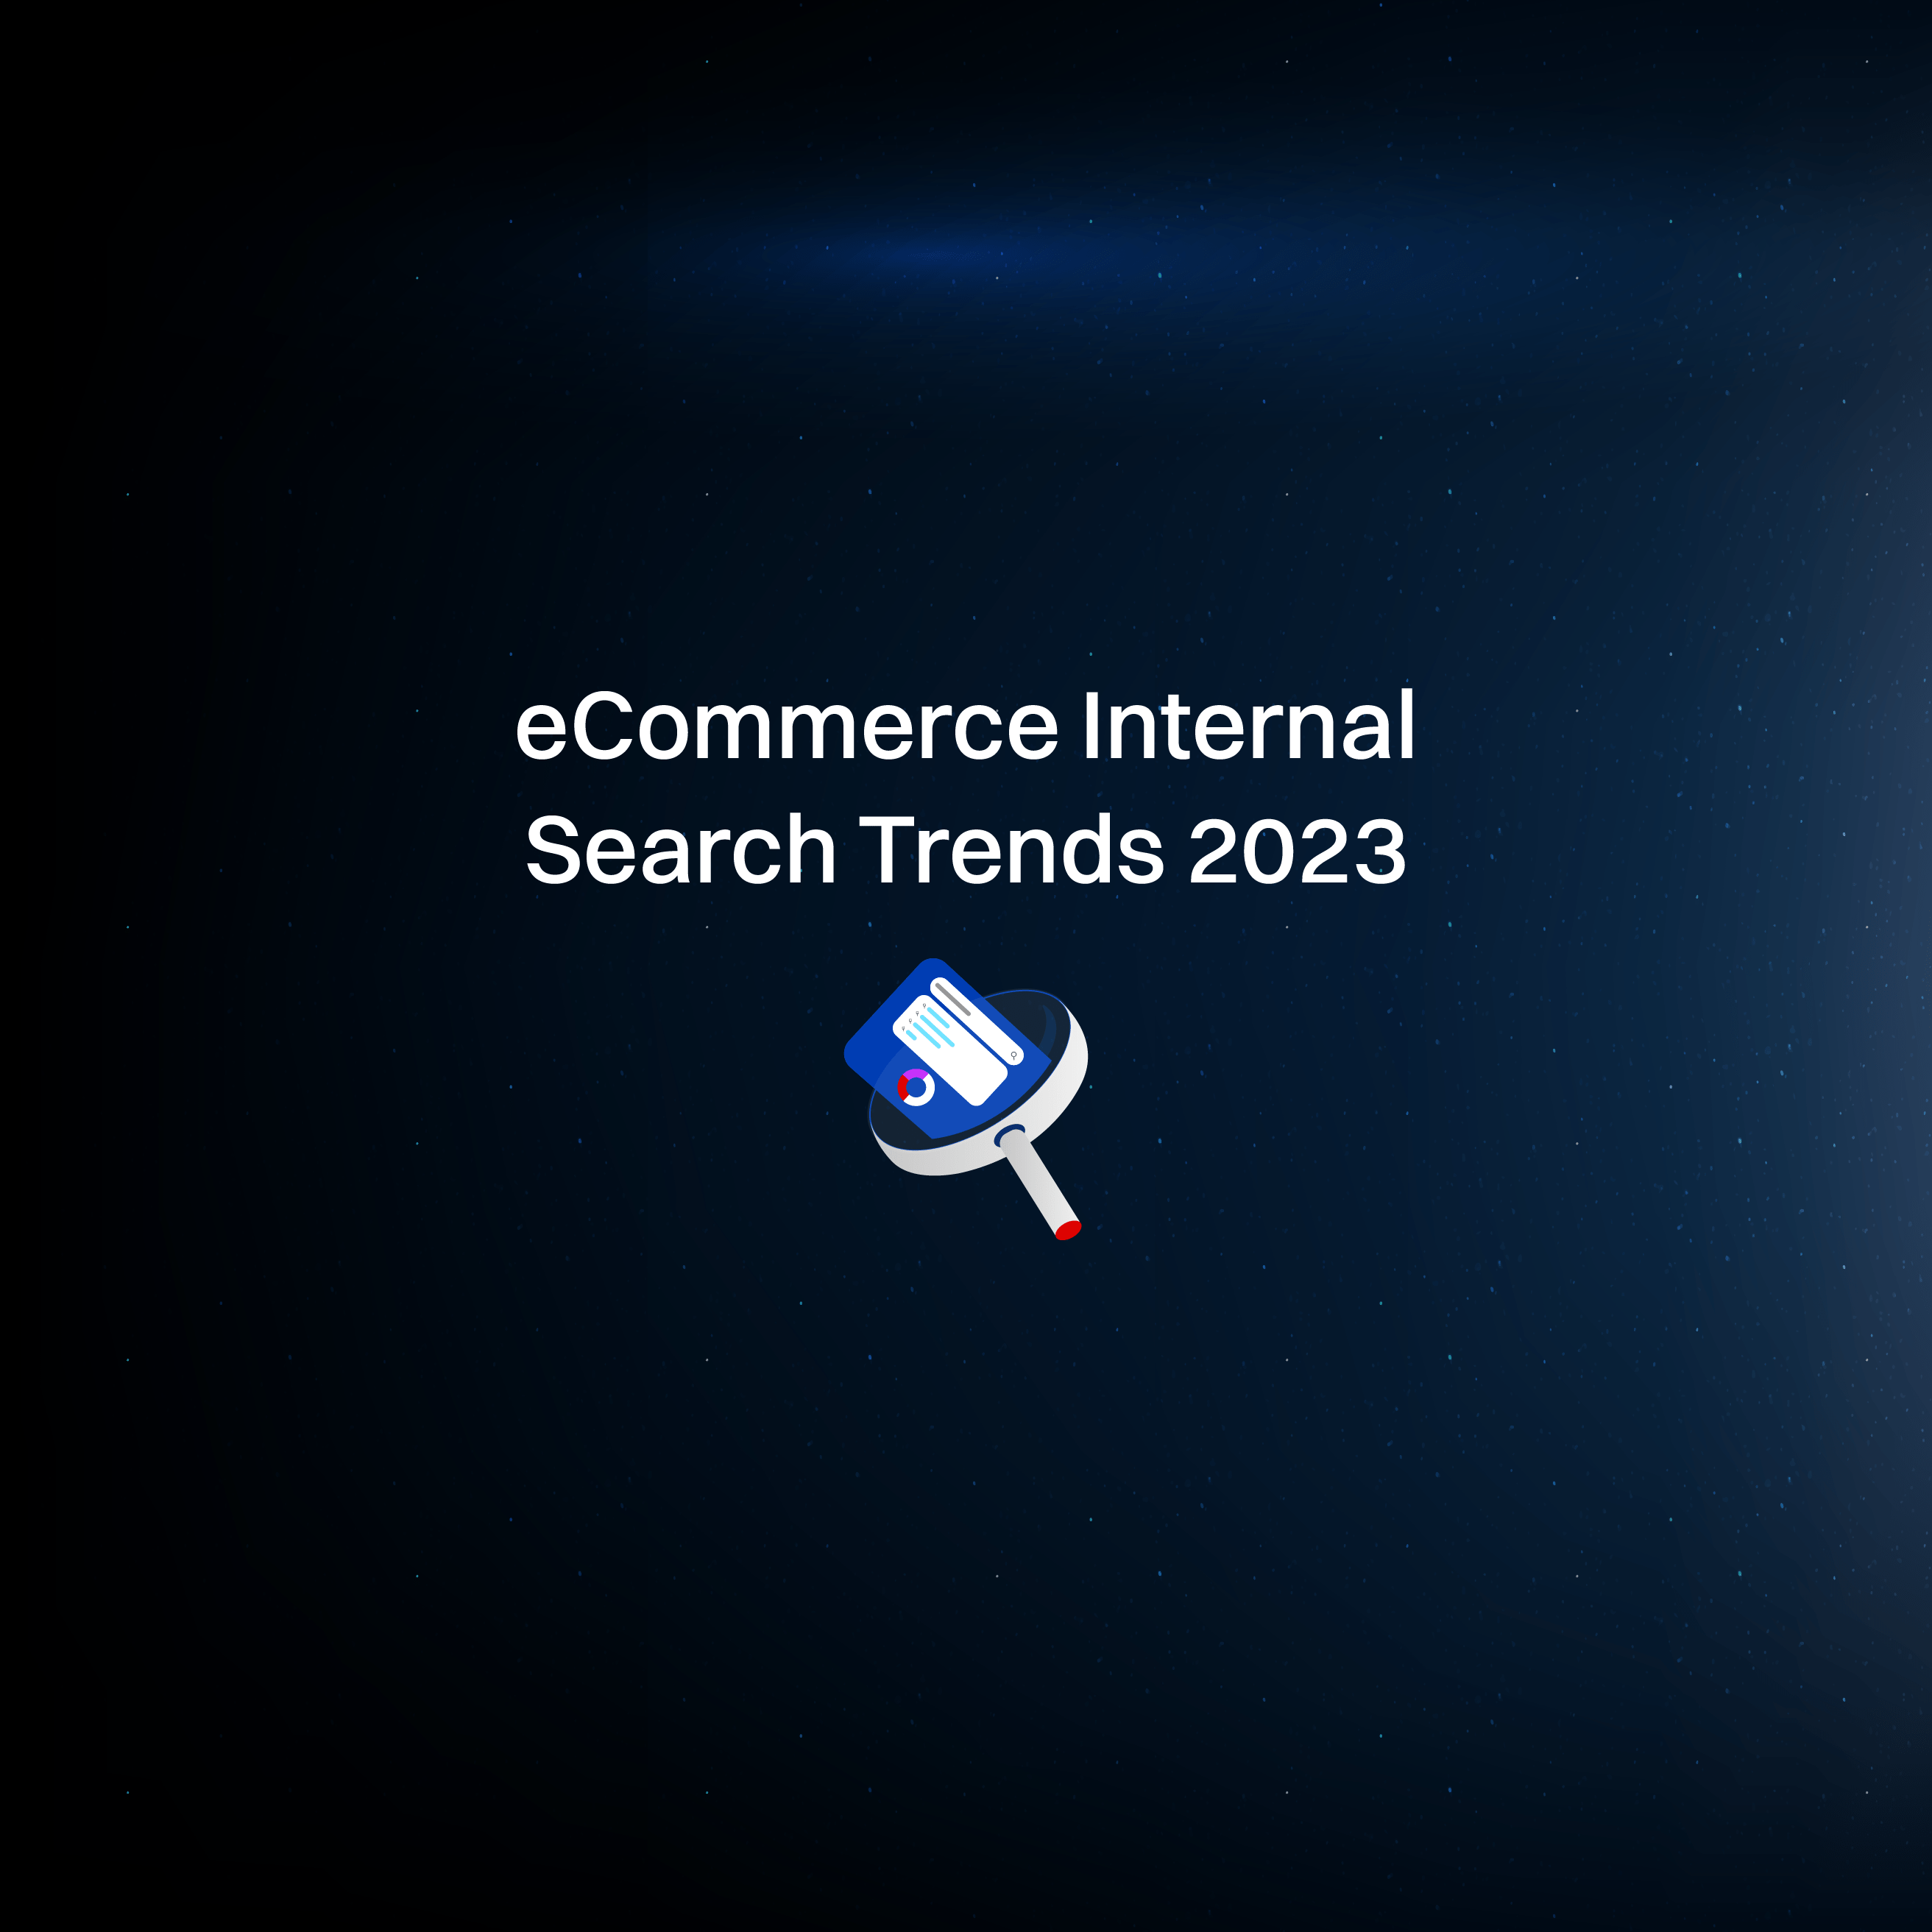 eCommerce Internal Search Trends 2023